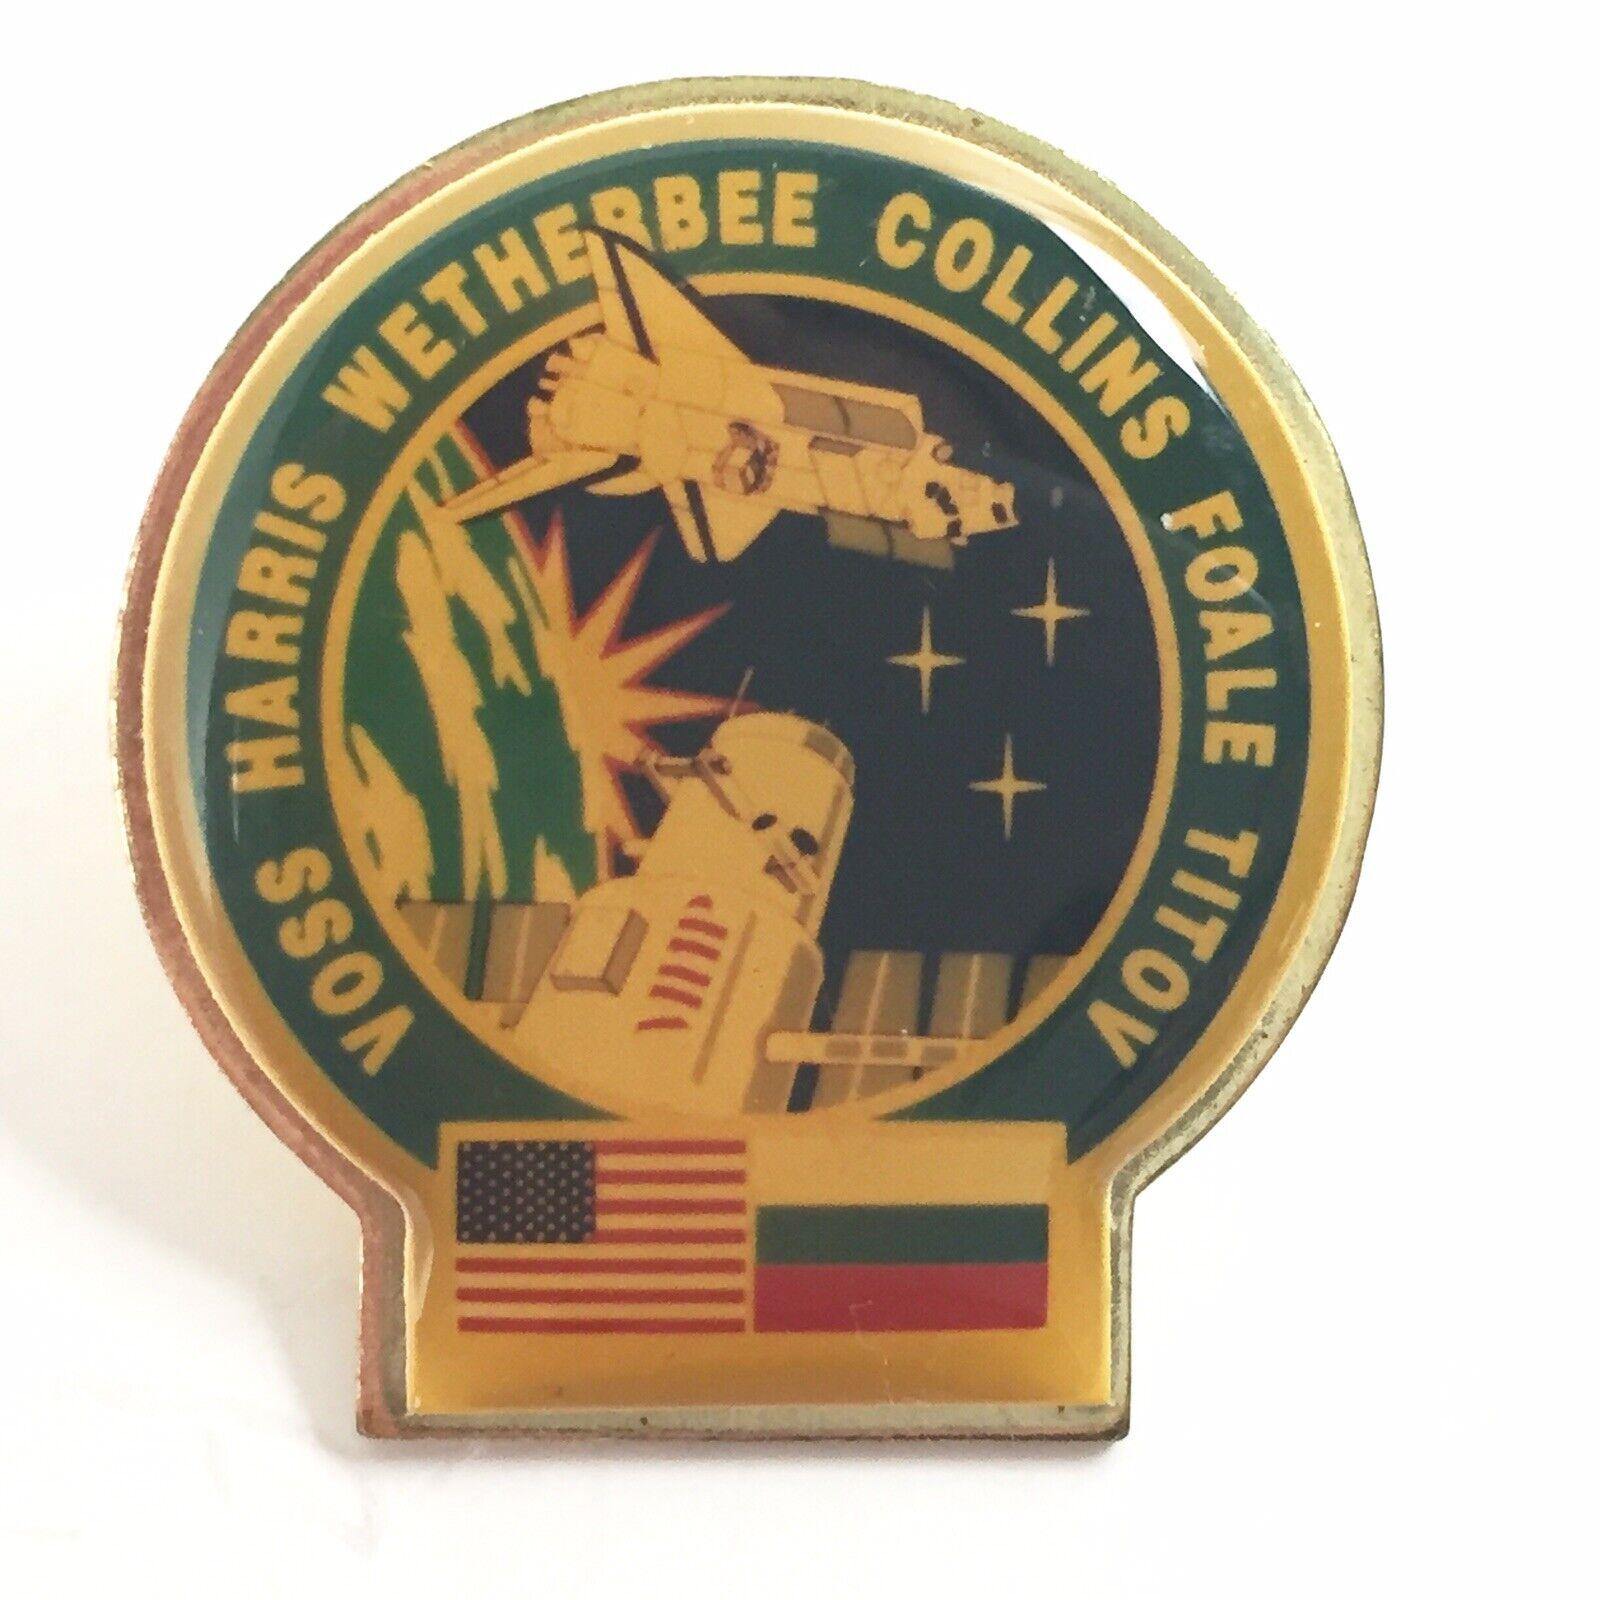 NASA STS-63 Space Exploration Pin Wethervee Voss Harris Collins Foale Titov